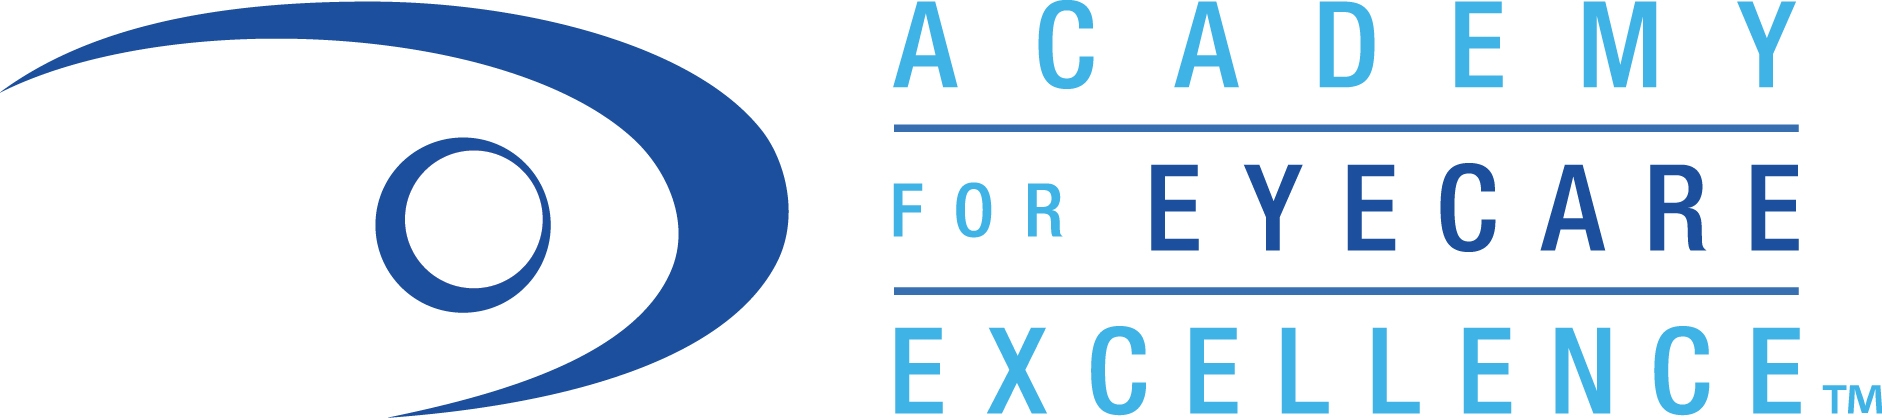 Alcon Academy for Eyecare Excellence